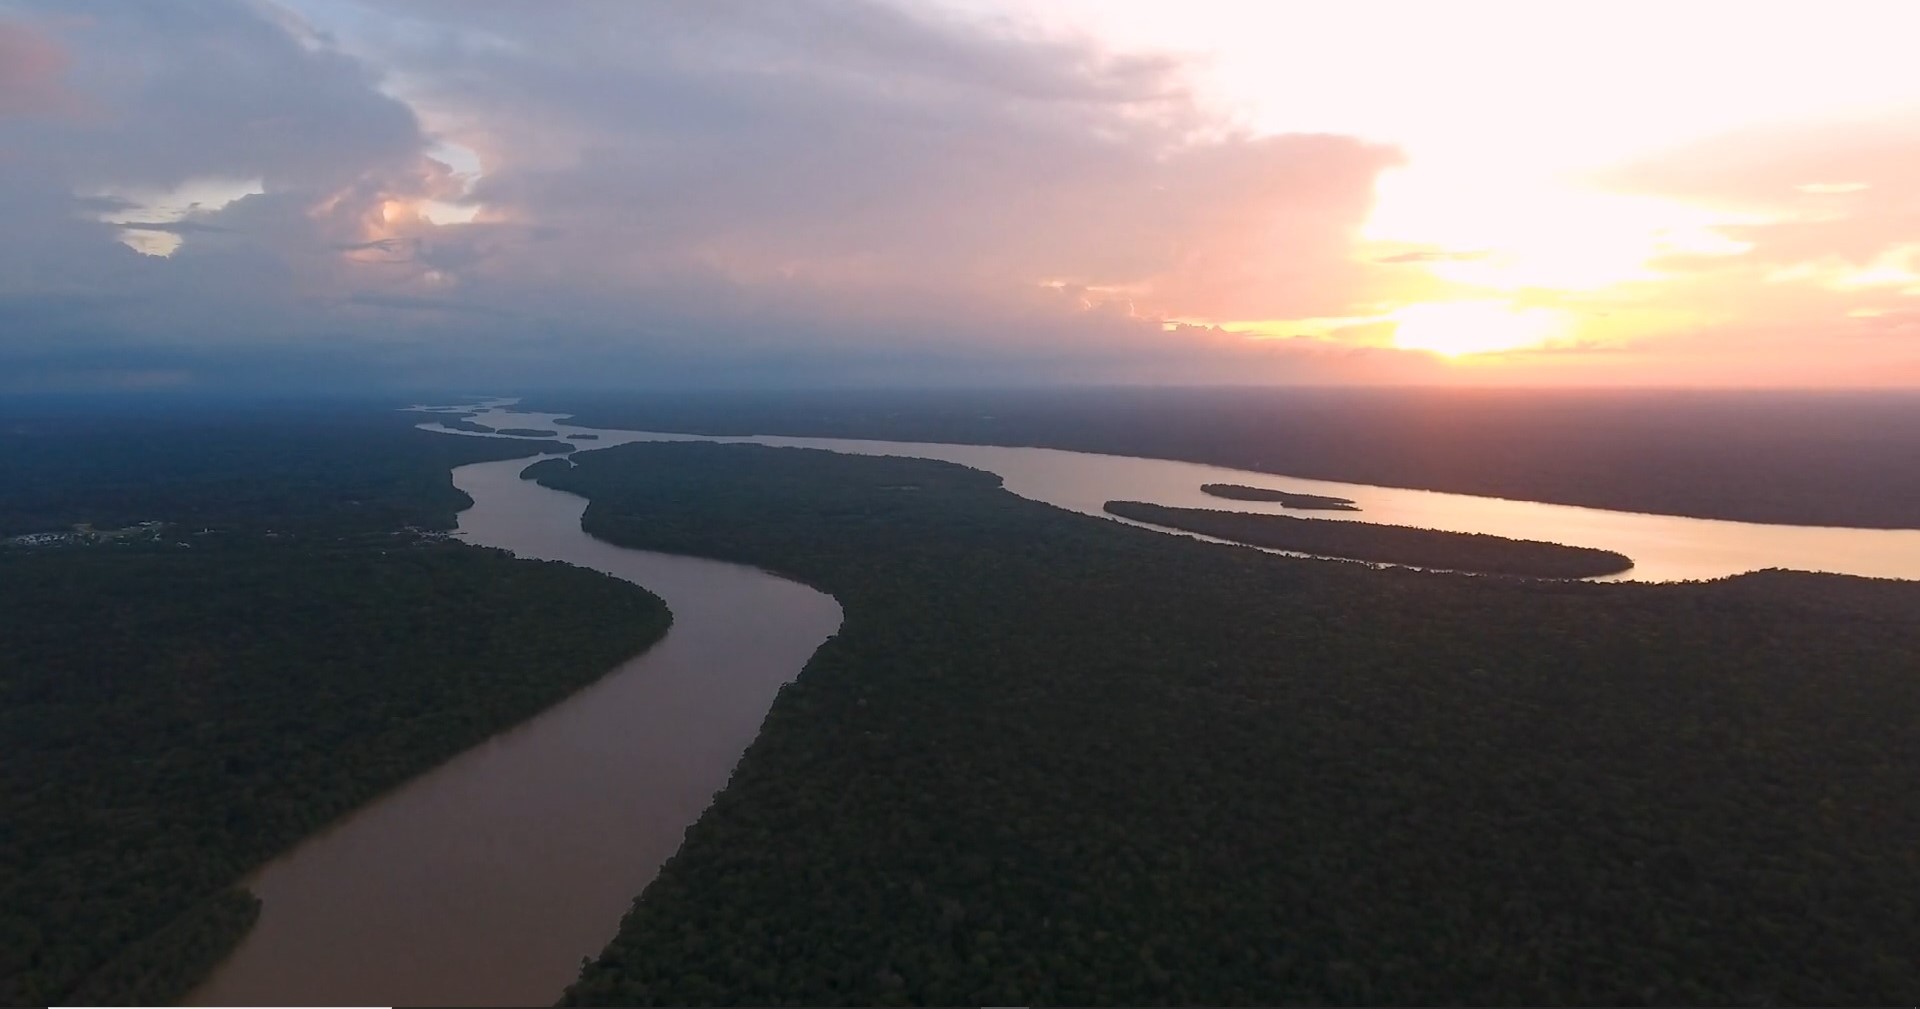 INVESTIGATION-In Brazil's Amazon, disputed carbon credit project feeds land-grabbing fears